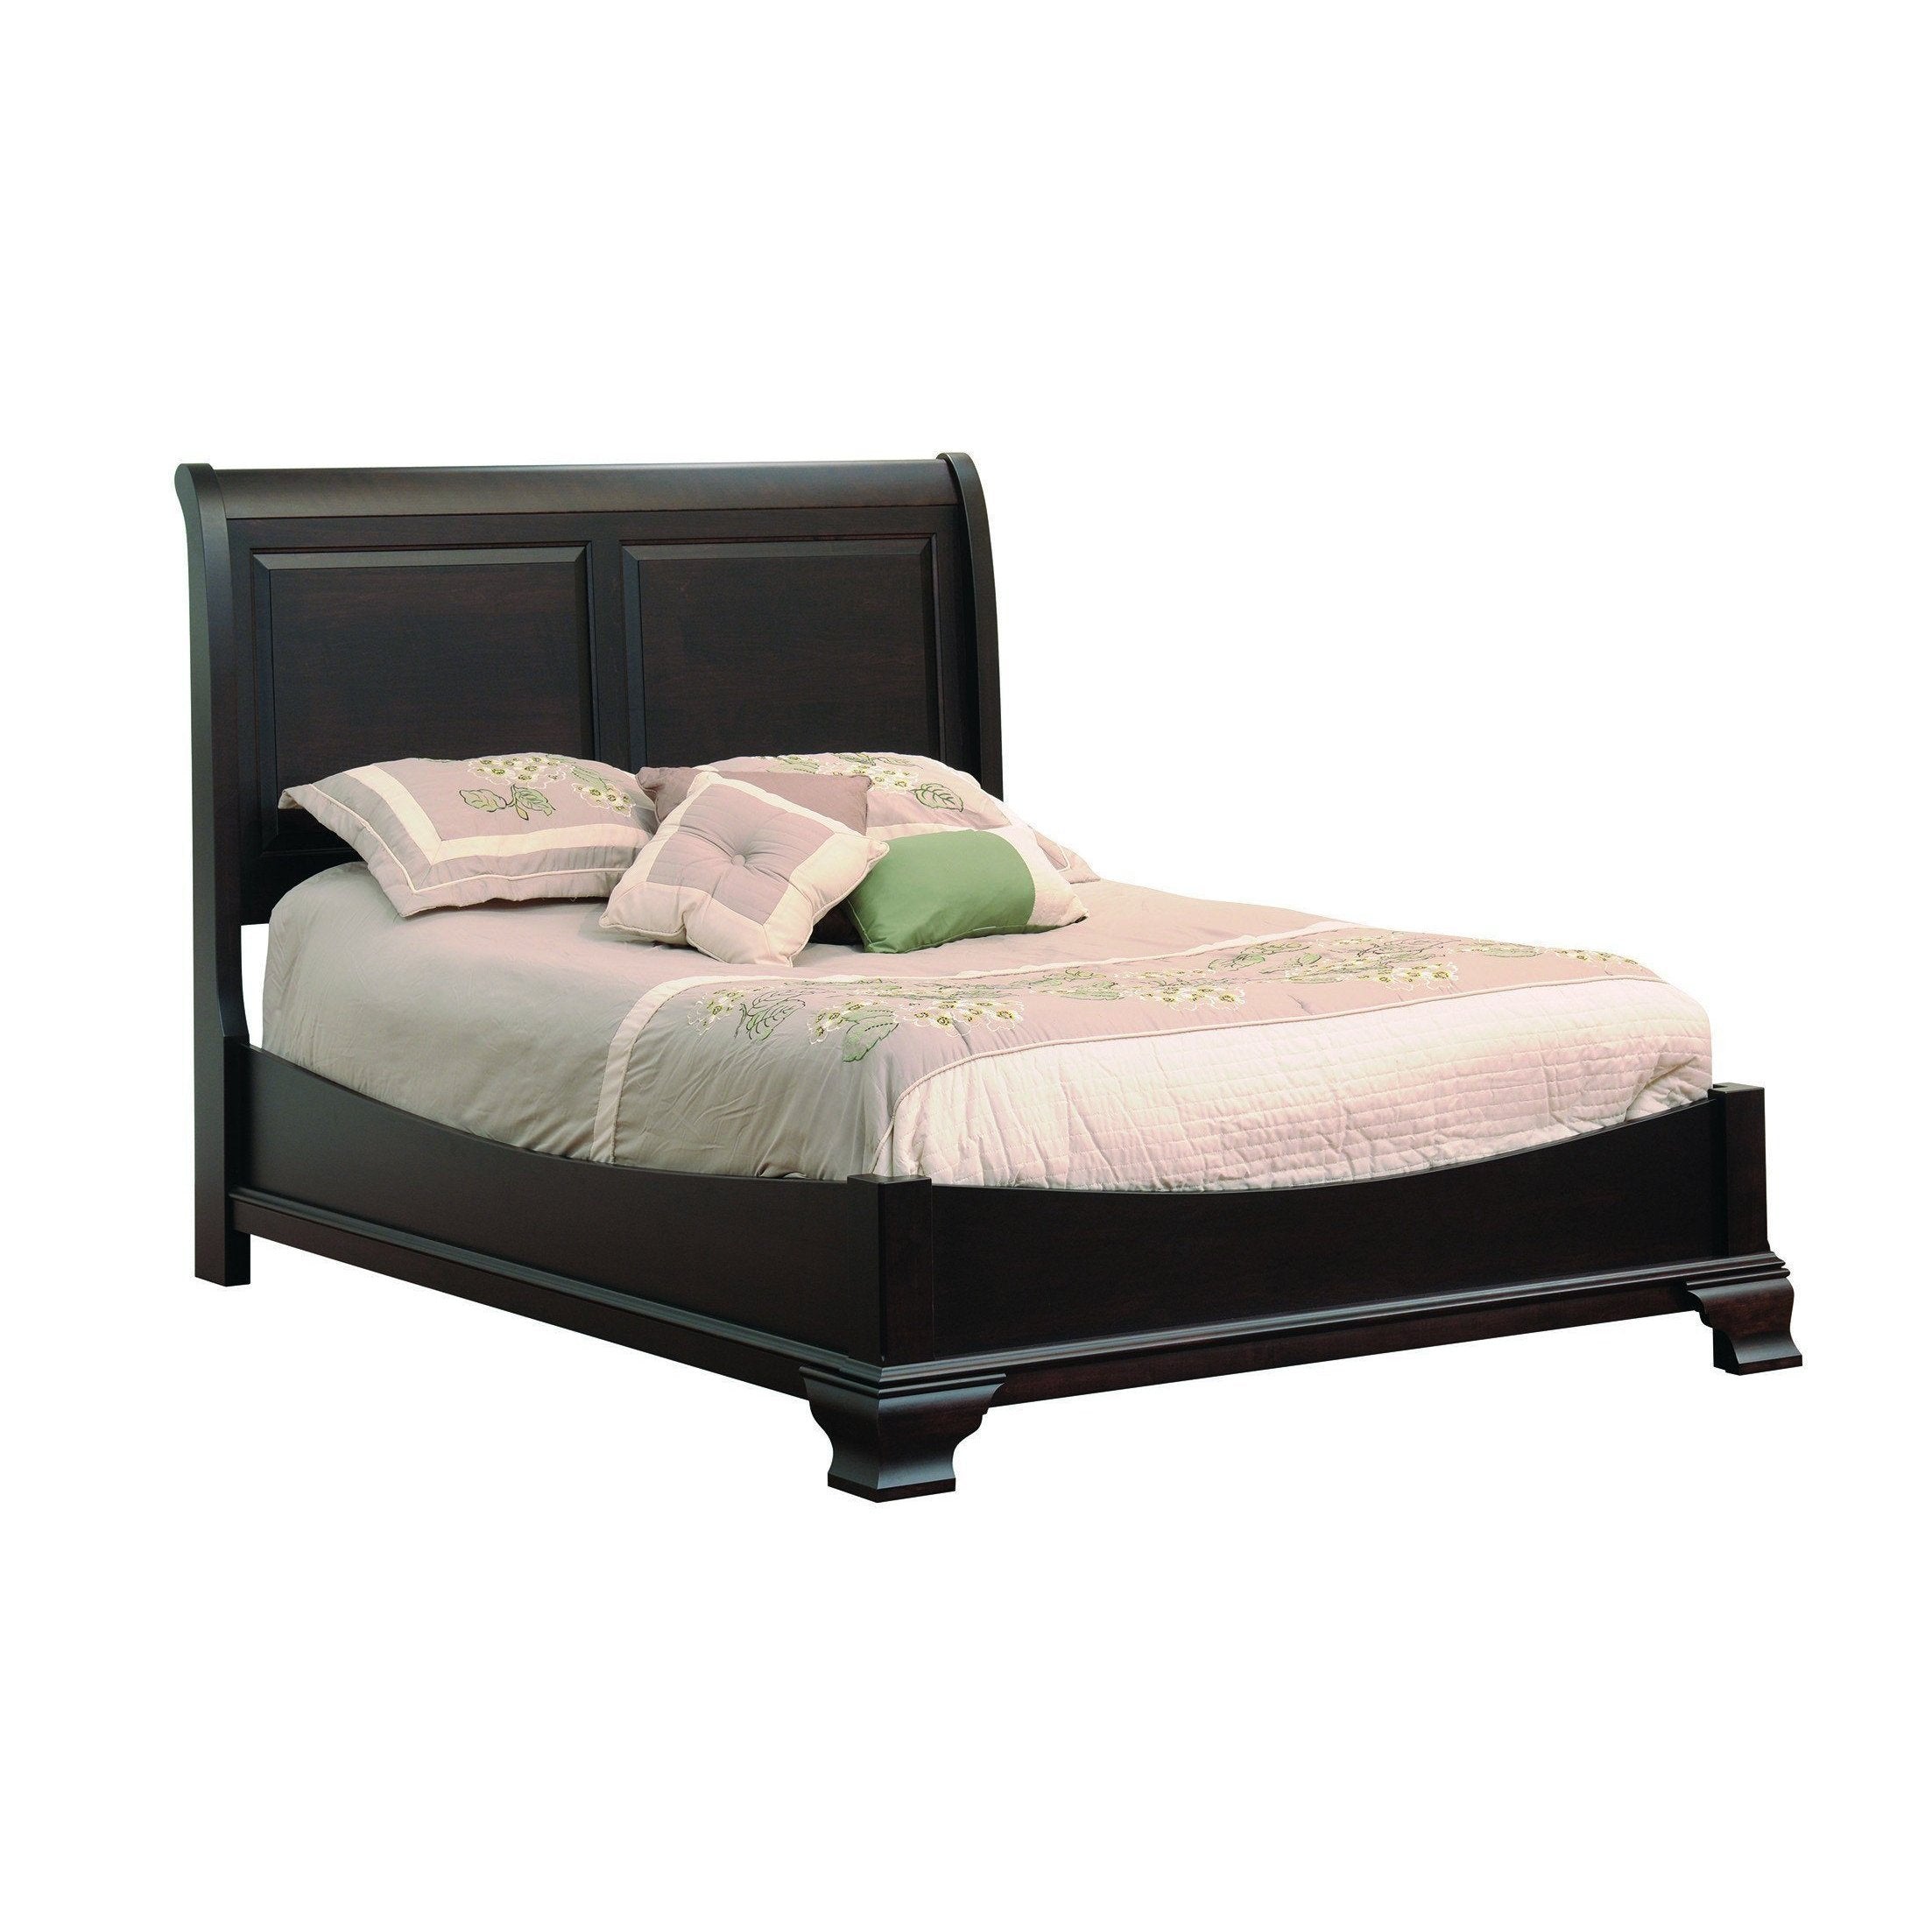 Walton Hills Sleigh Bed-Bedroom-The Amish House